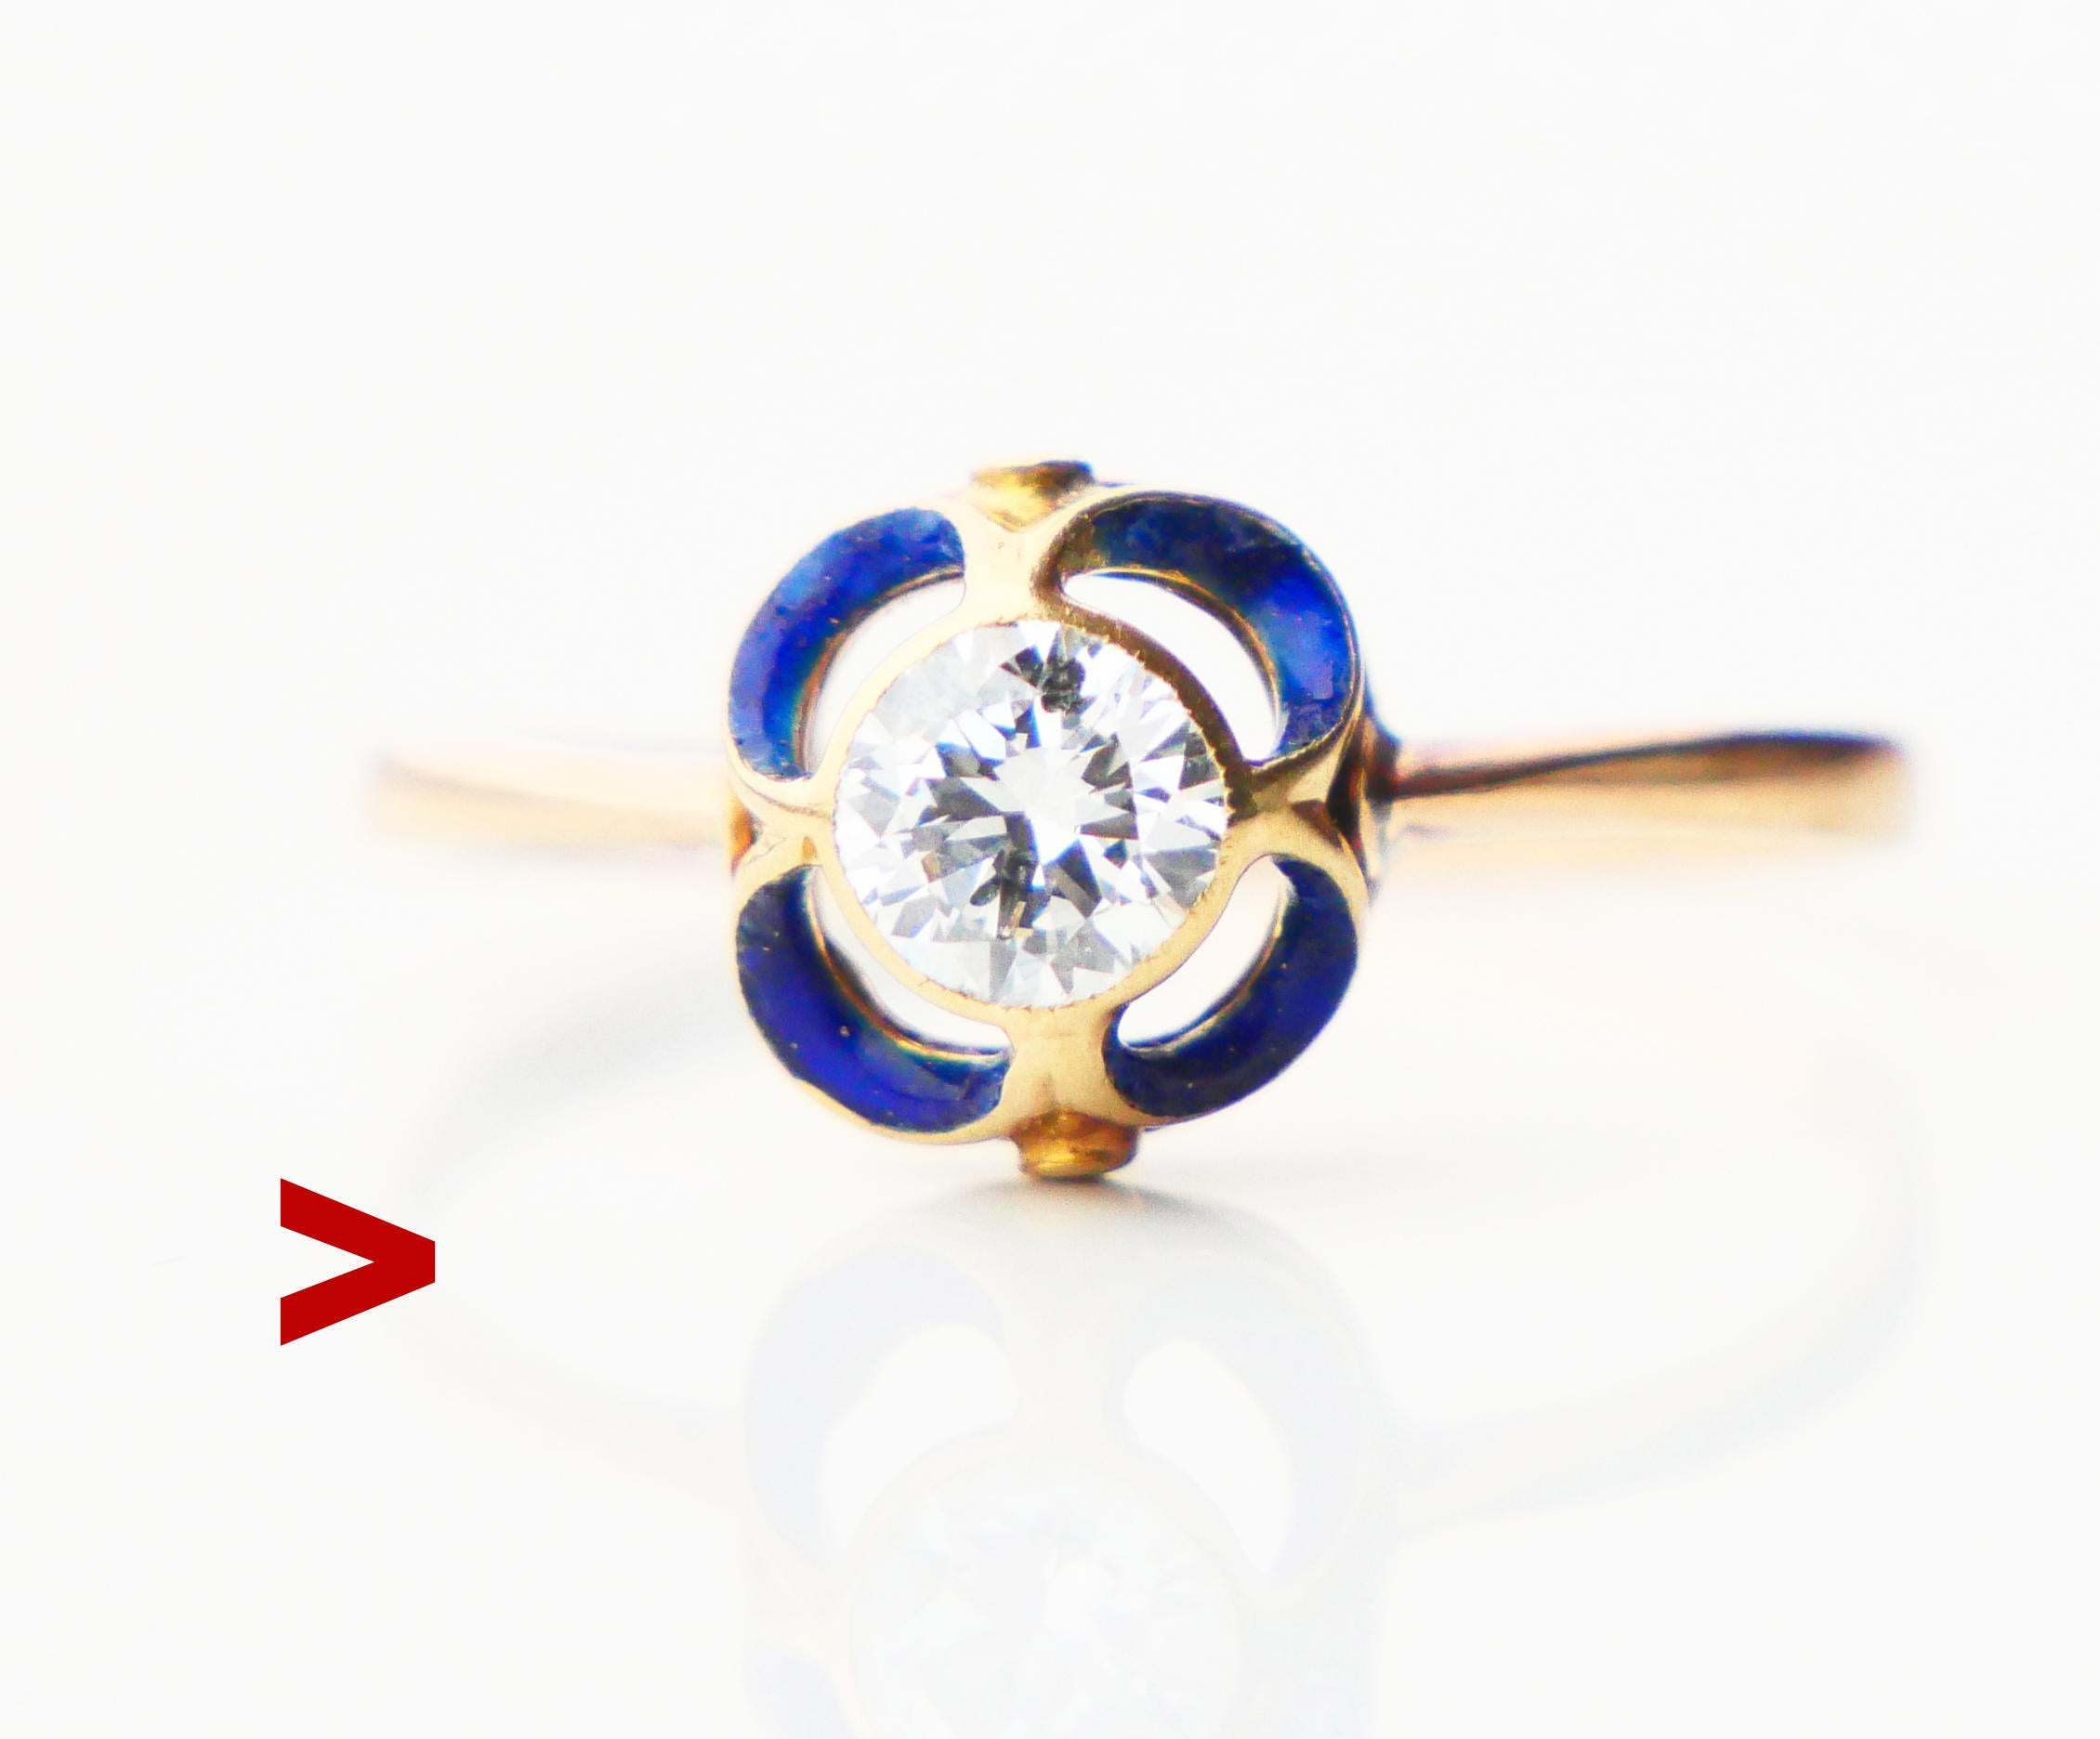 

Elegant Art Nouveau period Diamond and Blue Enamel Ring. Band in solid 18ct Rose Gold and crown in 18K Yellow Gold accented with Cobalt Blue Enamel.

Diamond of old European cut Ø 5 mm x 3 mm deep / ca. 0.5ct color ca. F.G / SI . Particle close to